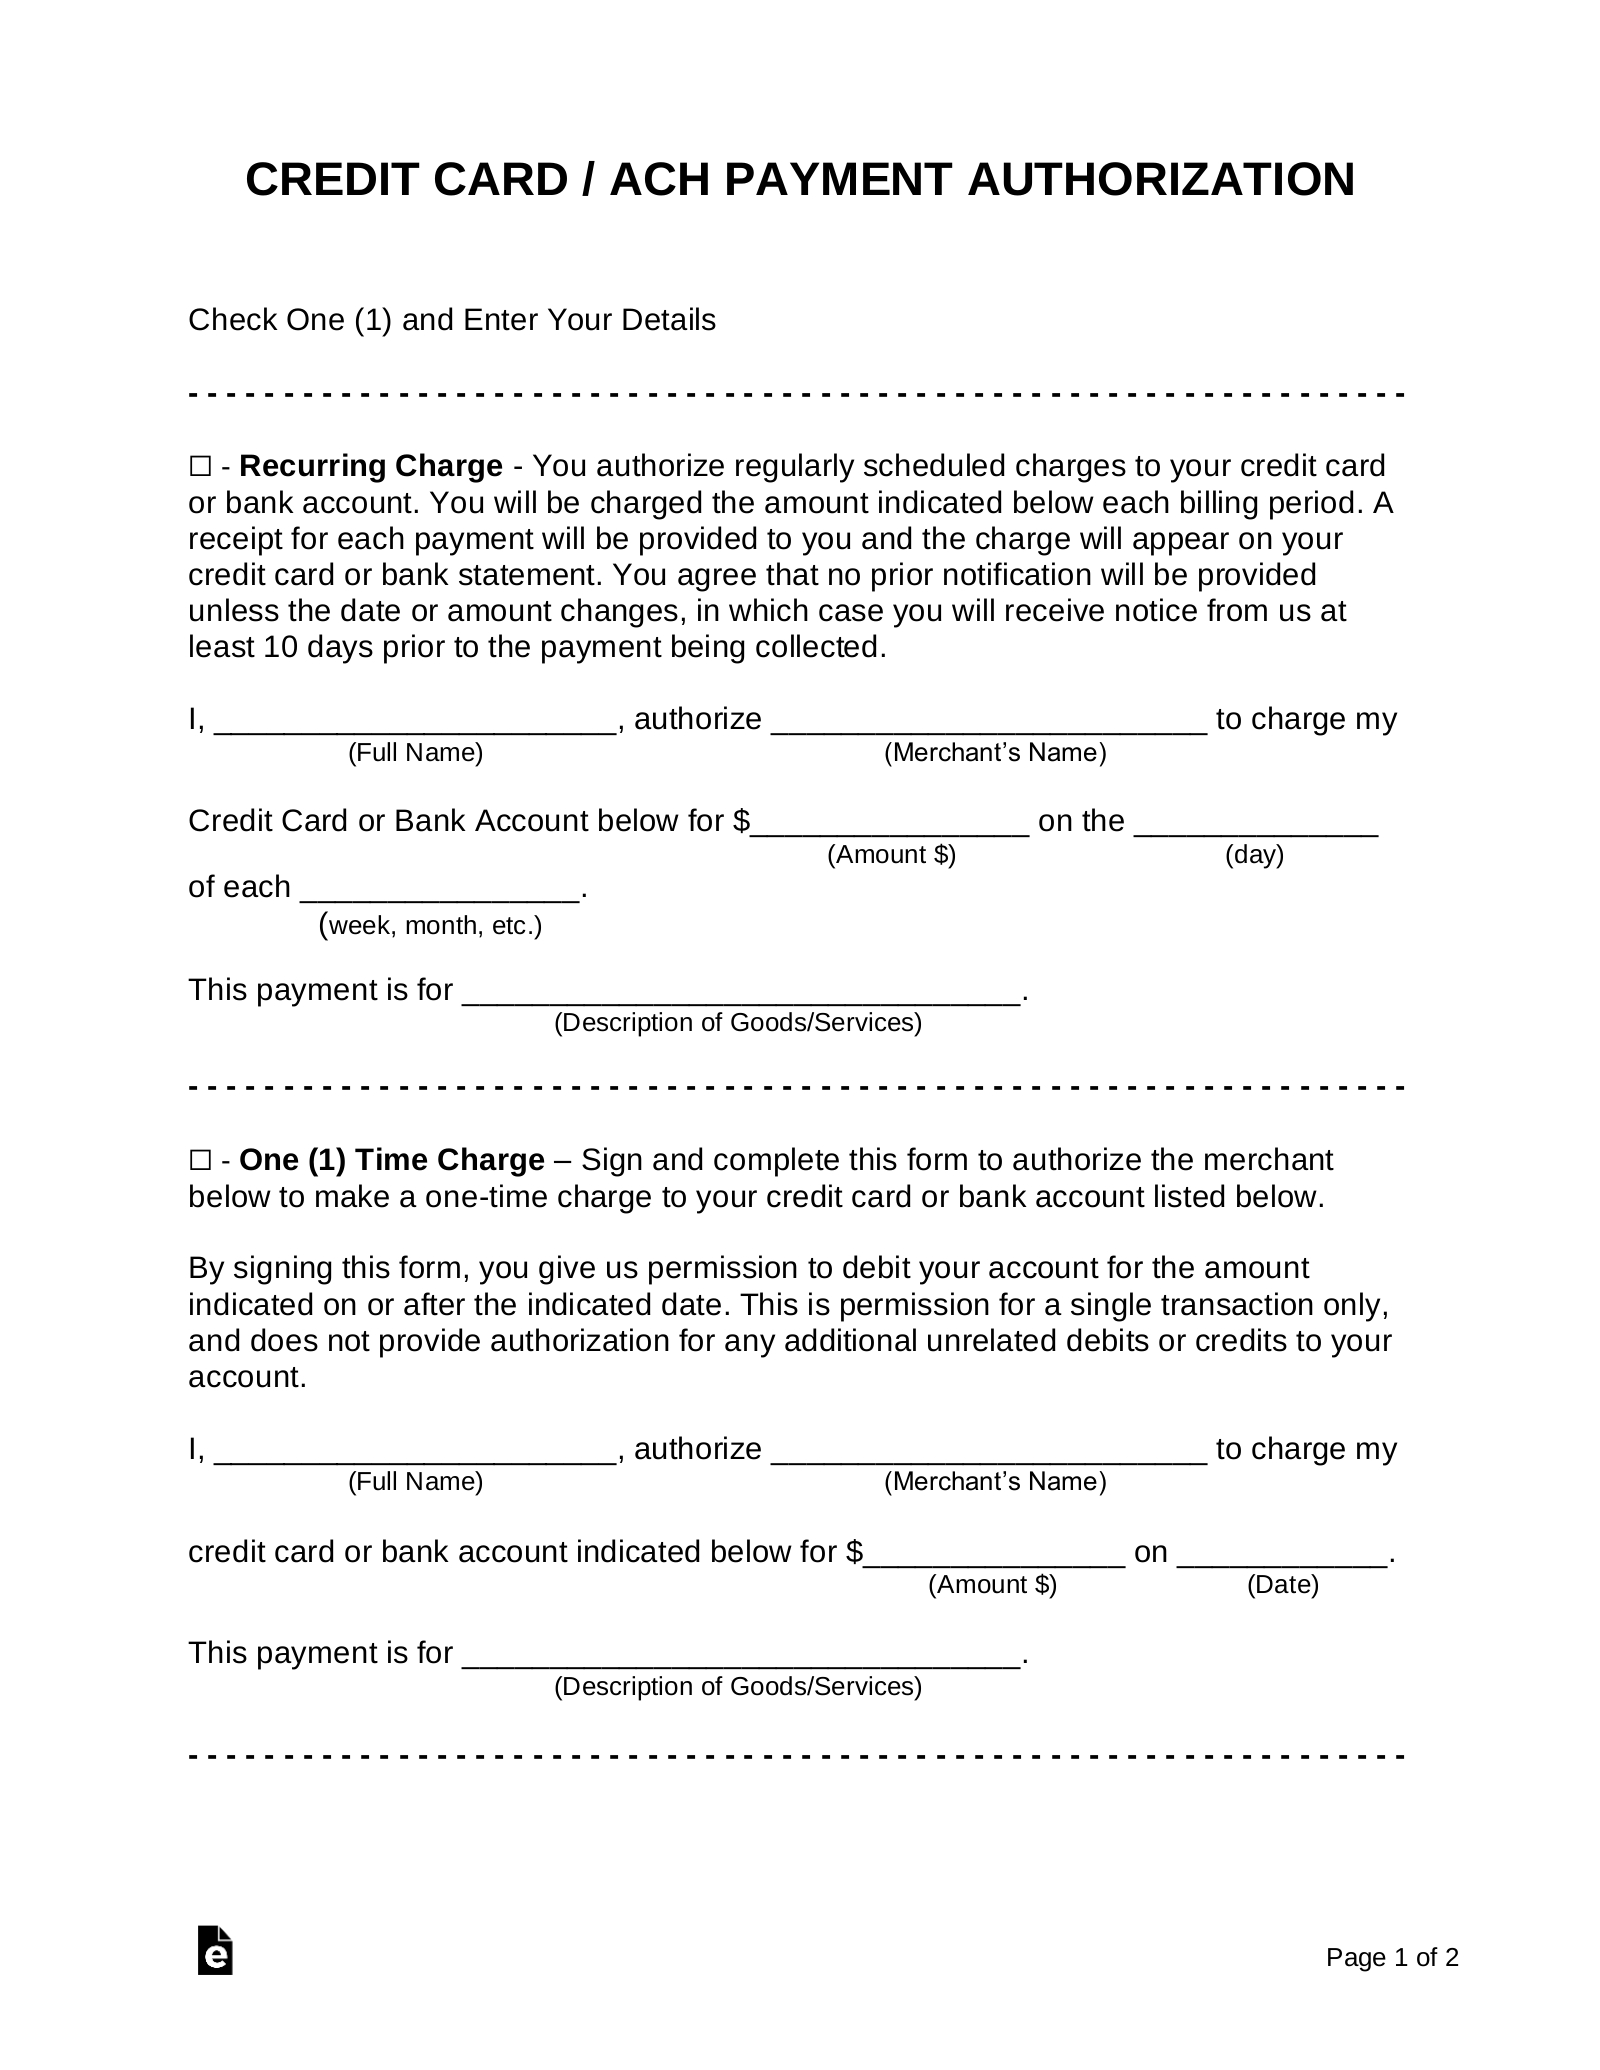 Free Credit Card (Ach) Authorization Forms – Pdf | Word For Authorization To Charge Credit Card Template